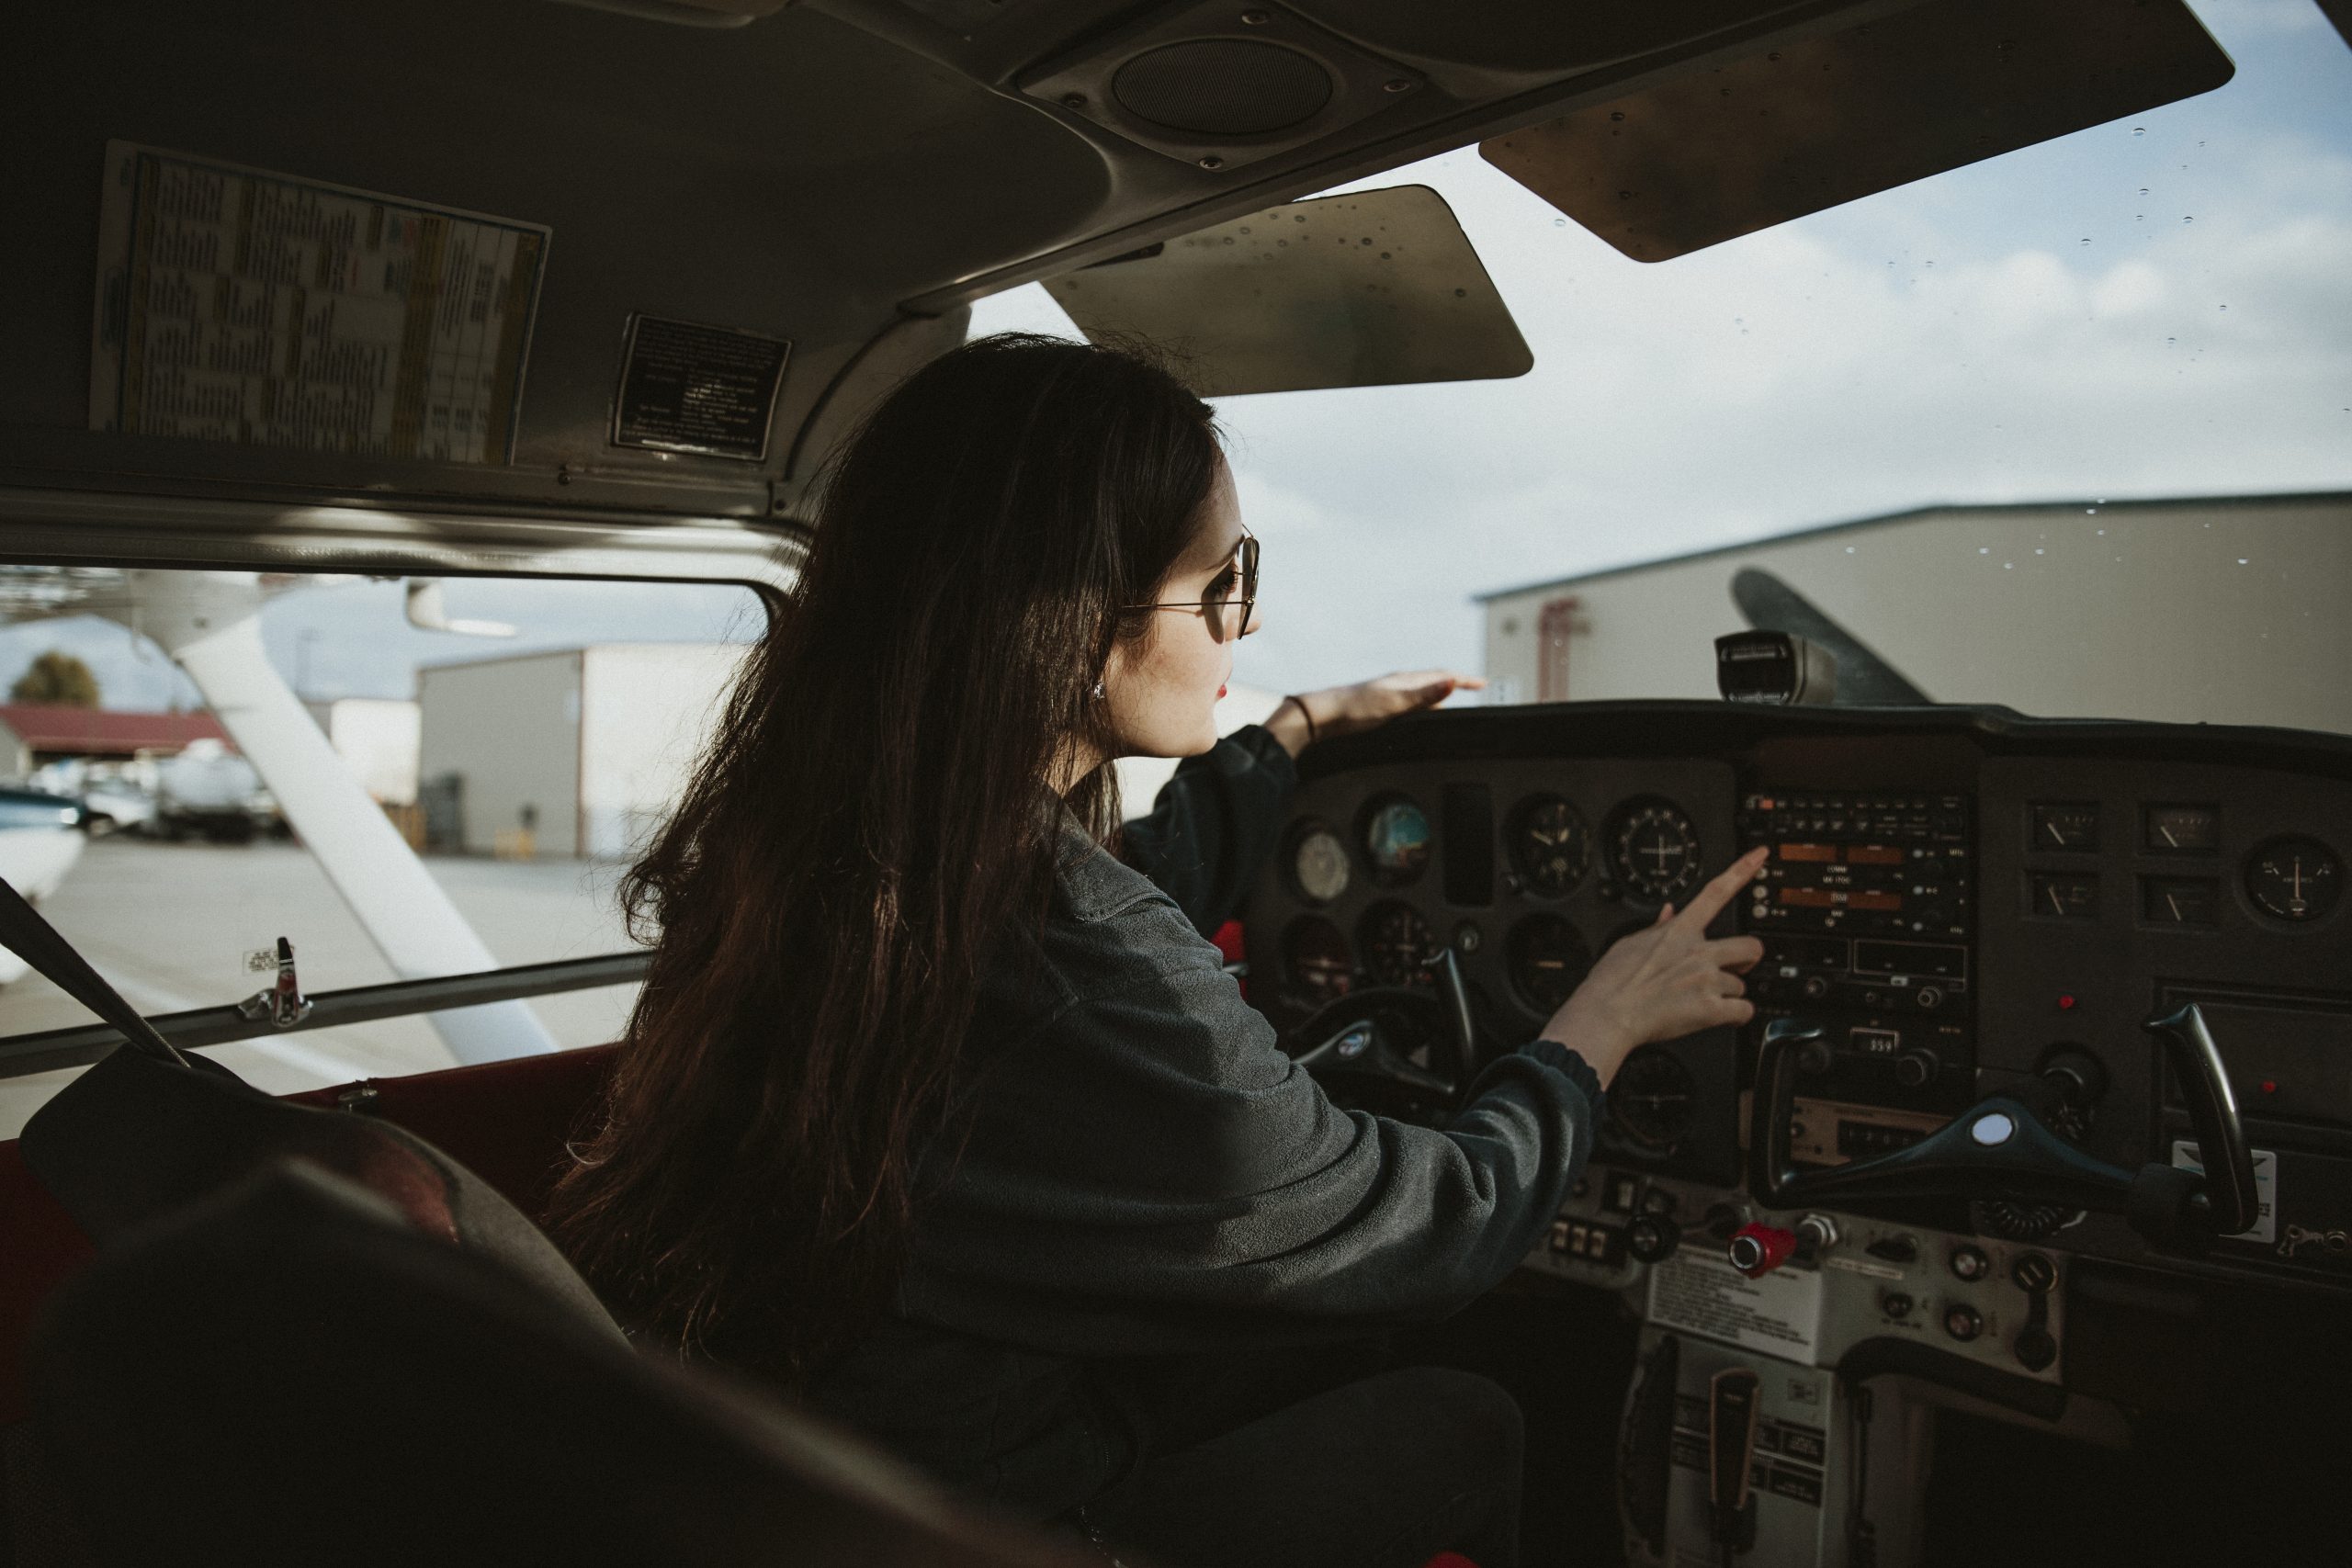 The Role of Women in Aviation